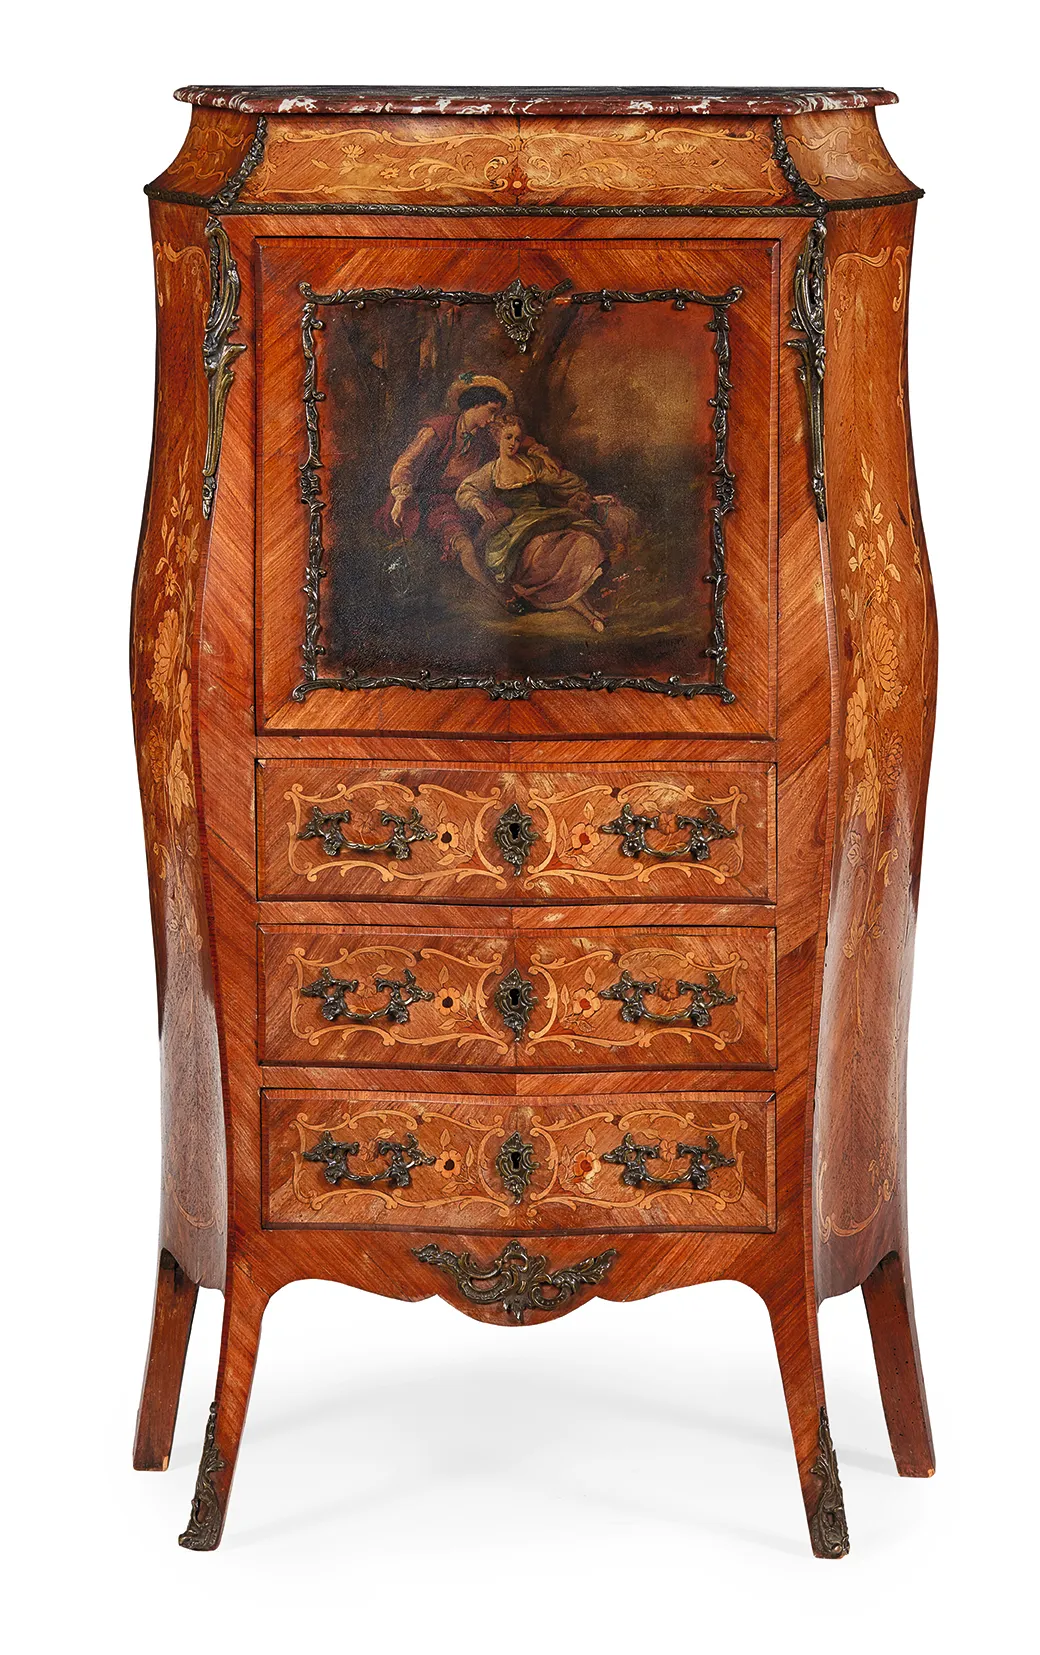 A late 19th-century French kingwood marquetry and Vernis Martin secretaire